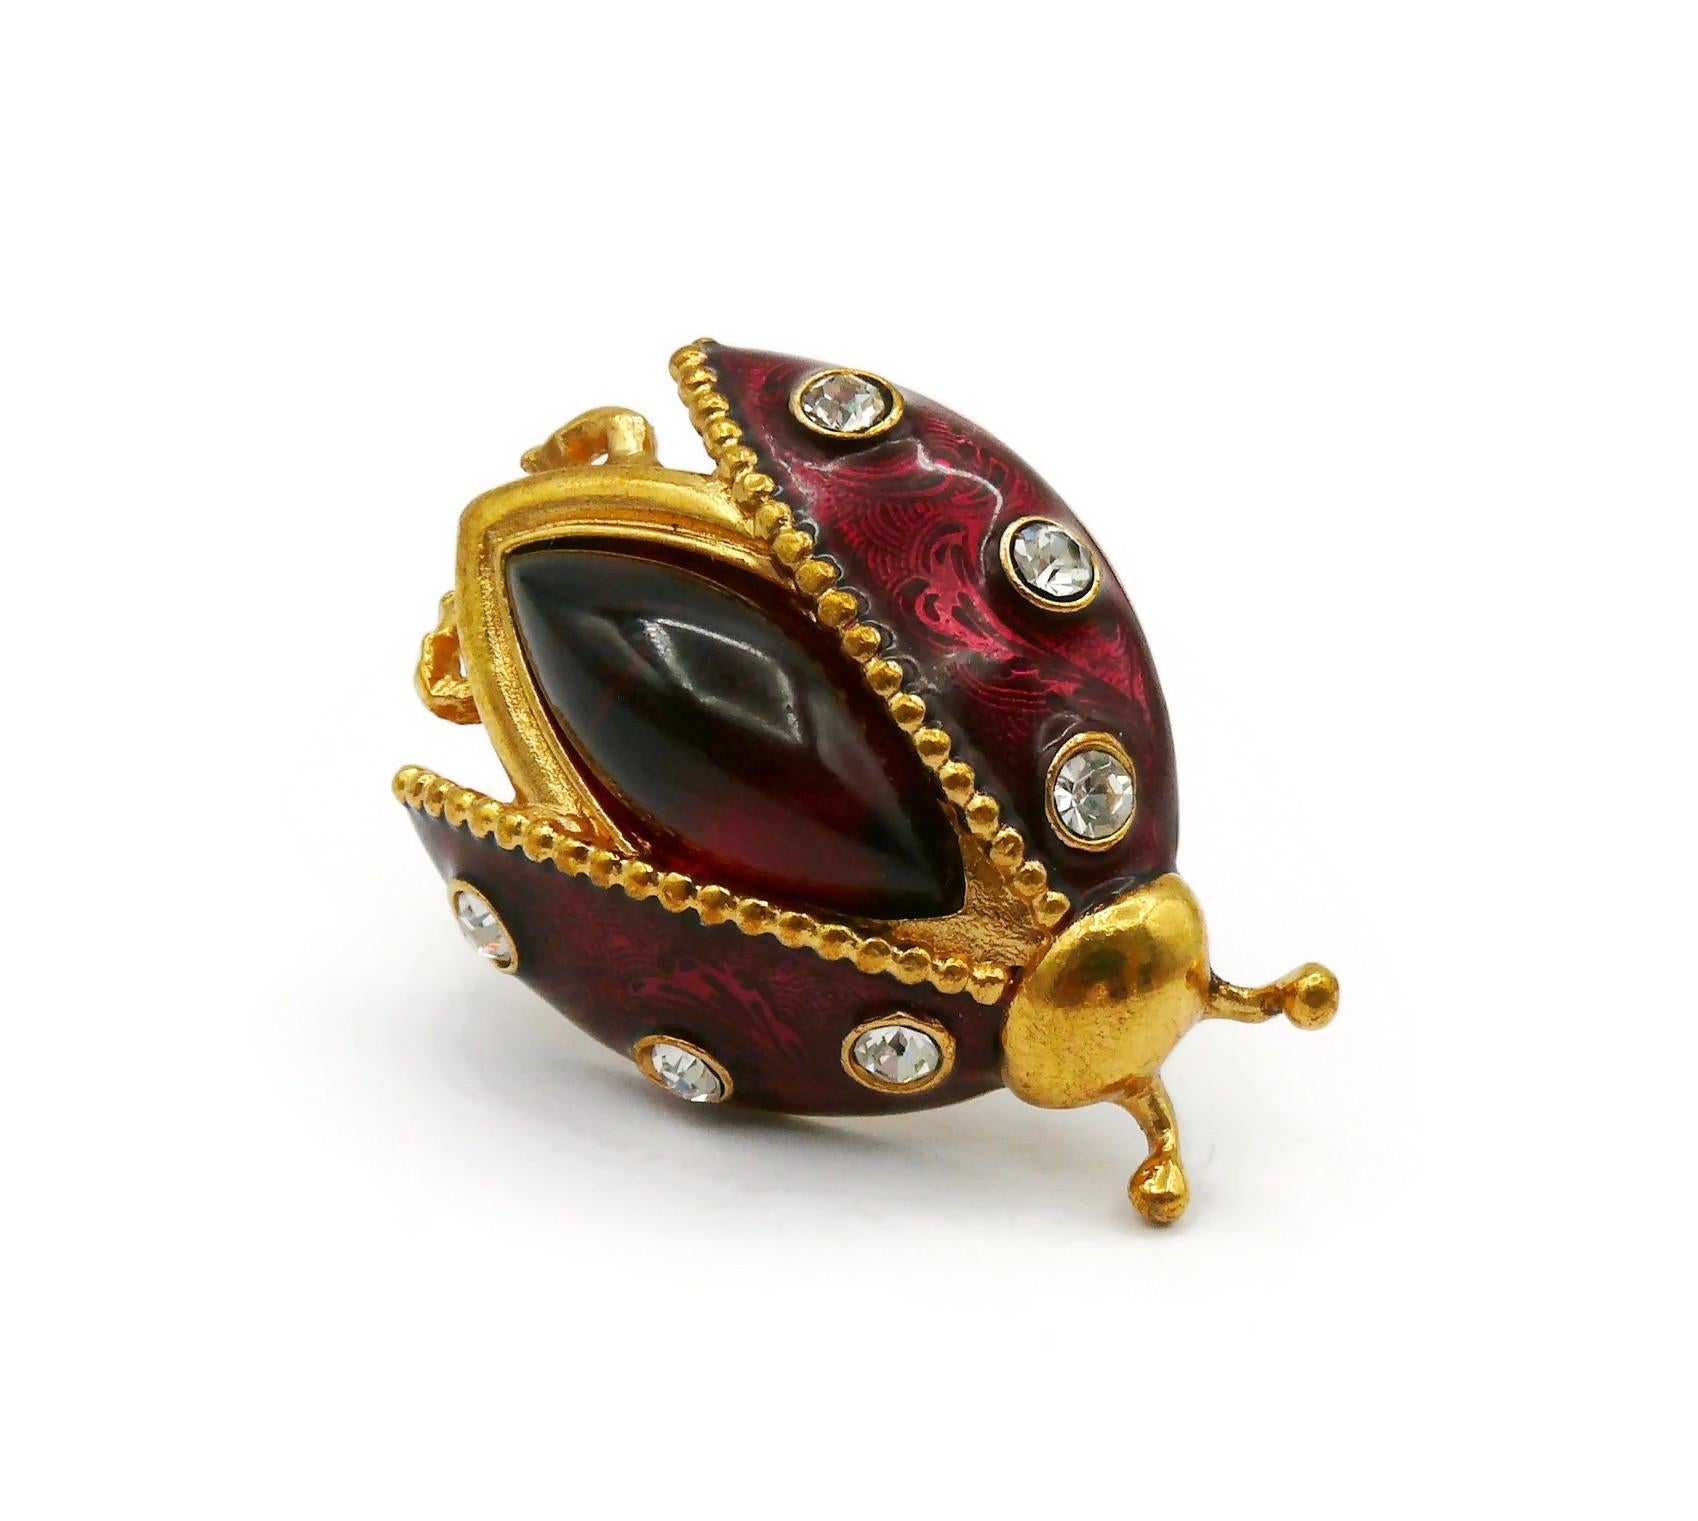 CHRISTIAN DIOR Vintage Jewelled Ladybug Brooch In Good Condition For Sale In Nice, FR